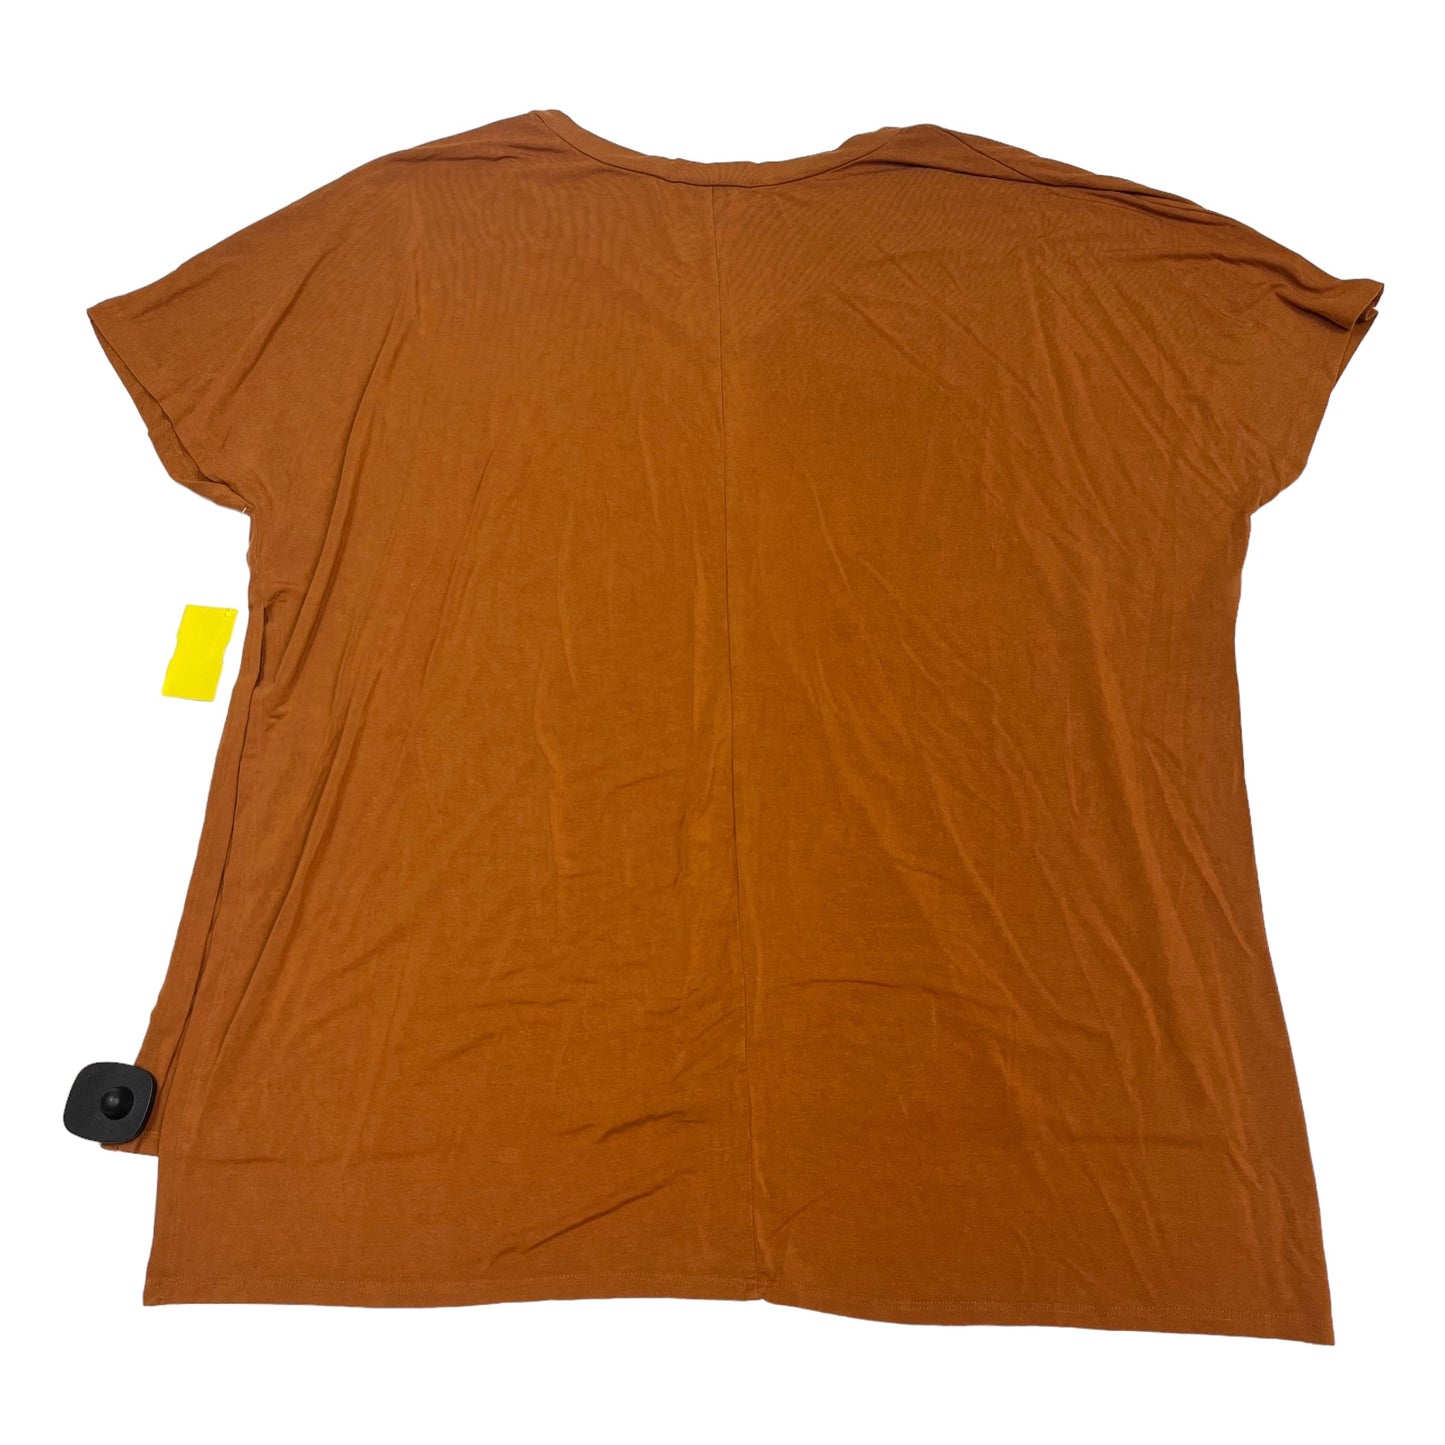 Brown Top Short Sleeve Zenana Outfitters, Size L